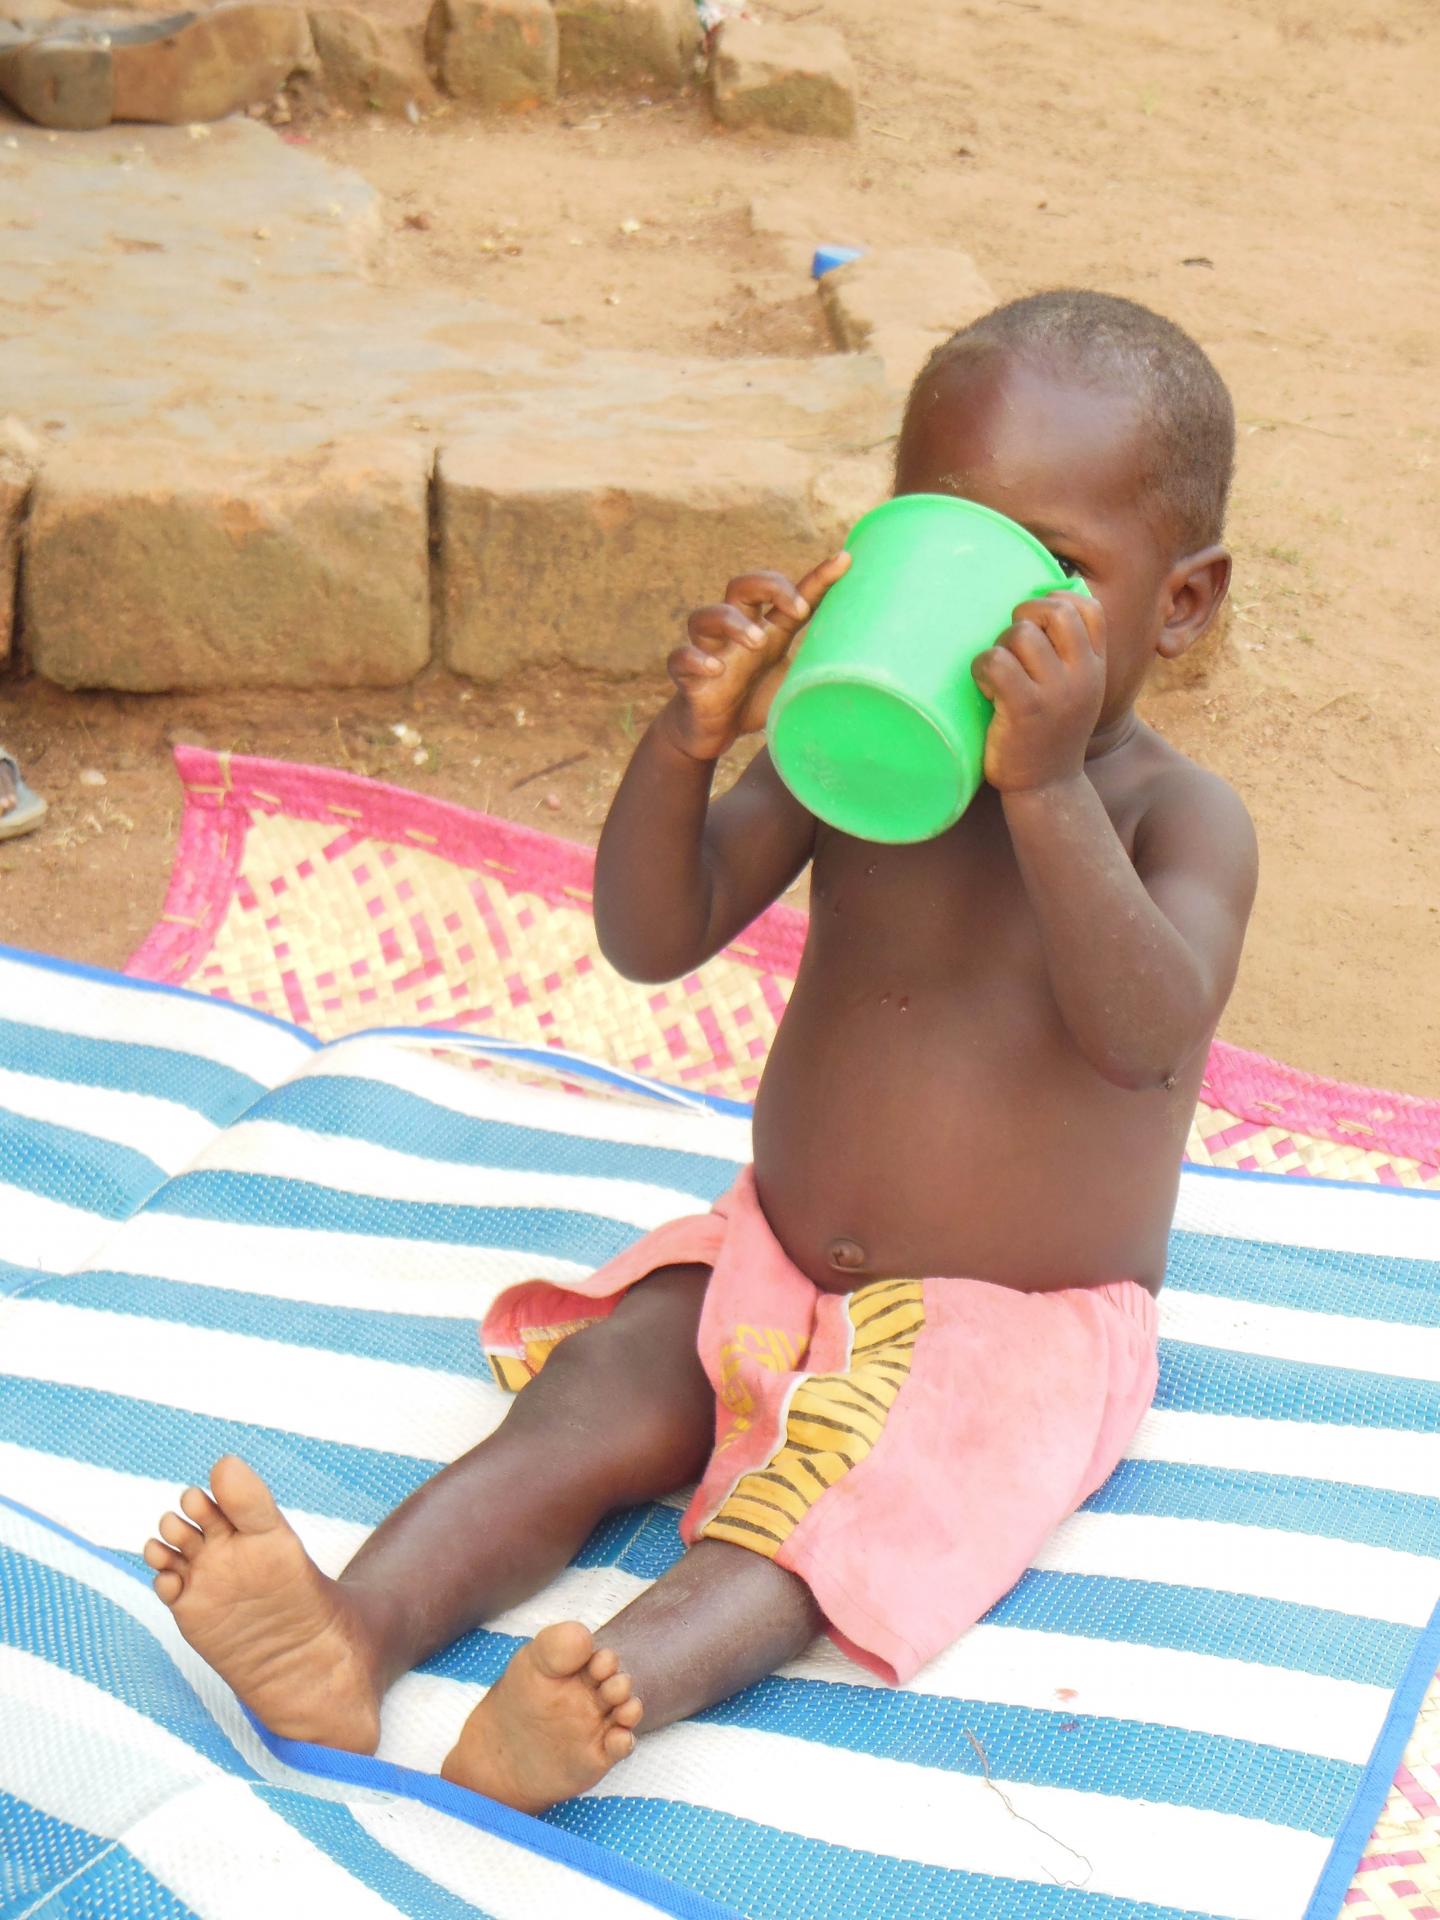 Child Drinking from Large Plastic Cup